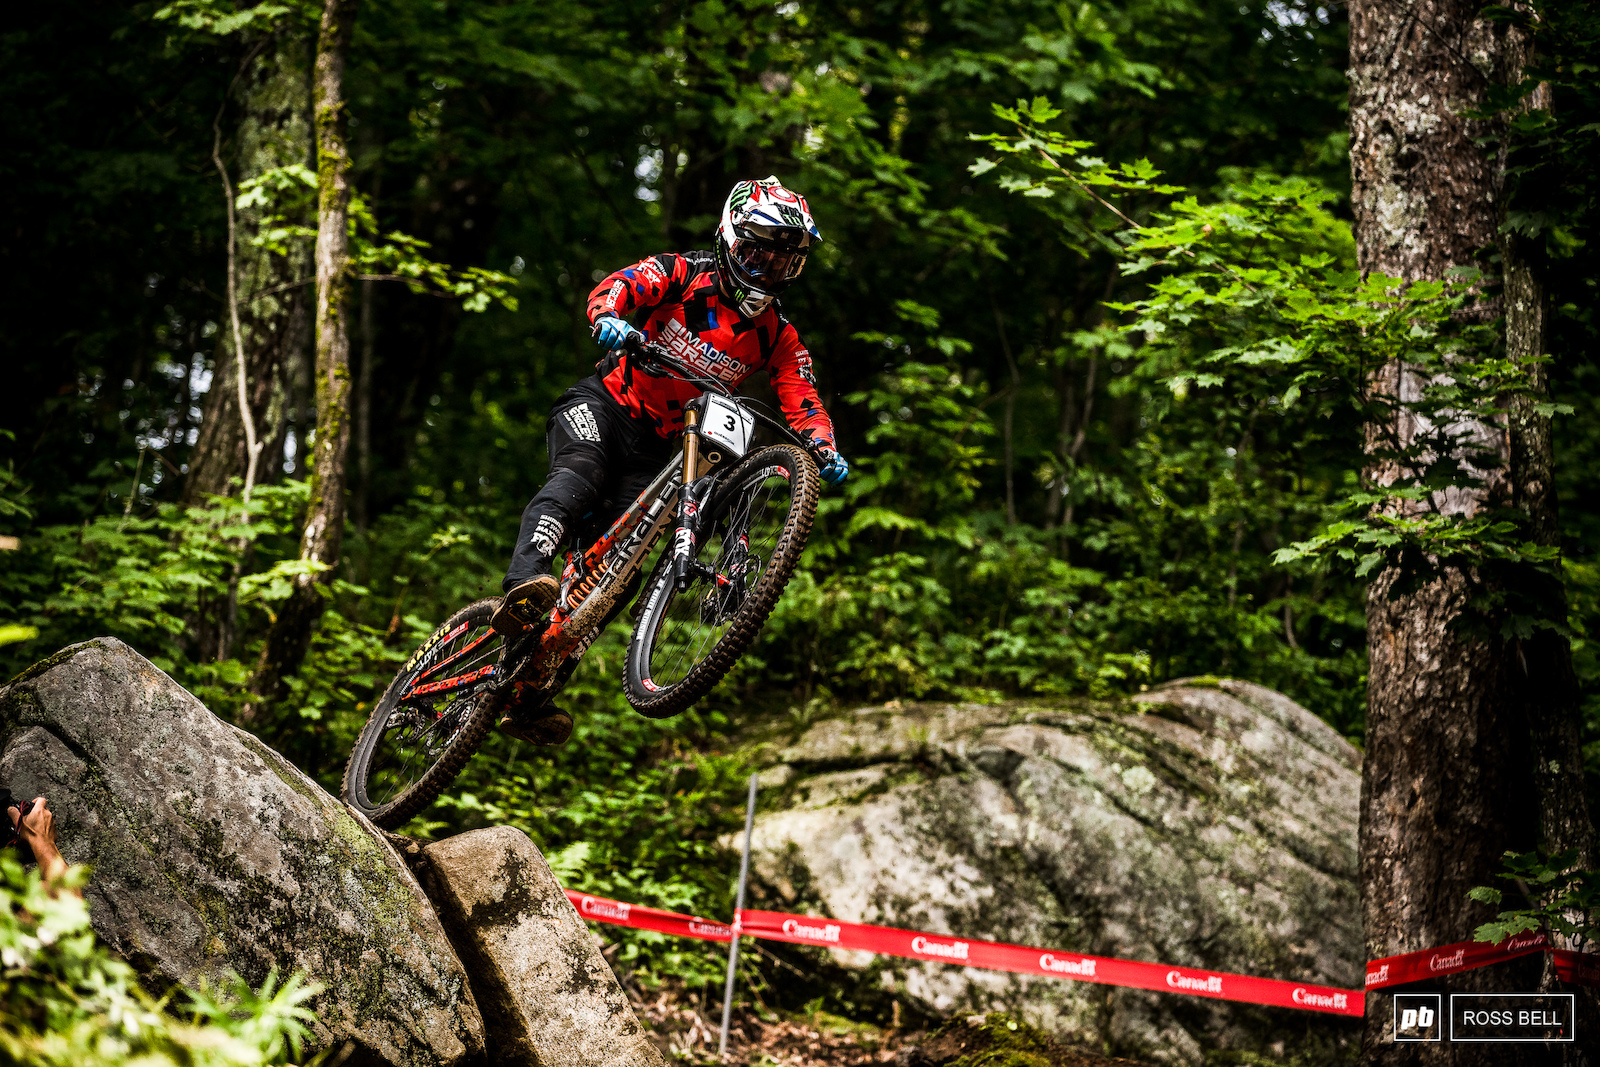 Danny Hart hasn’t taken a World Cup win so far in 2019 but a World Champs win would more than makeup for that.